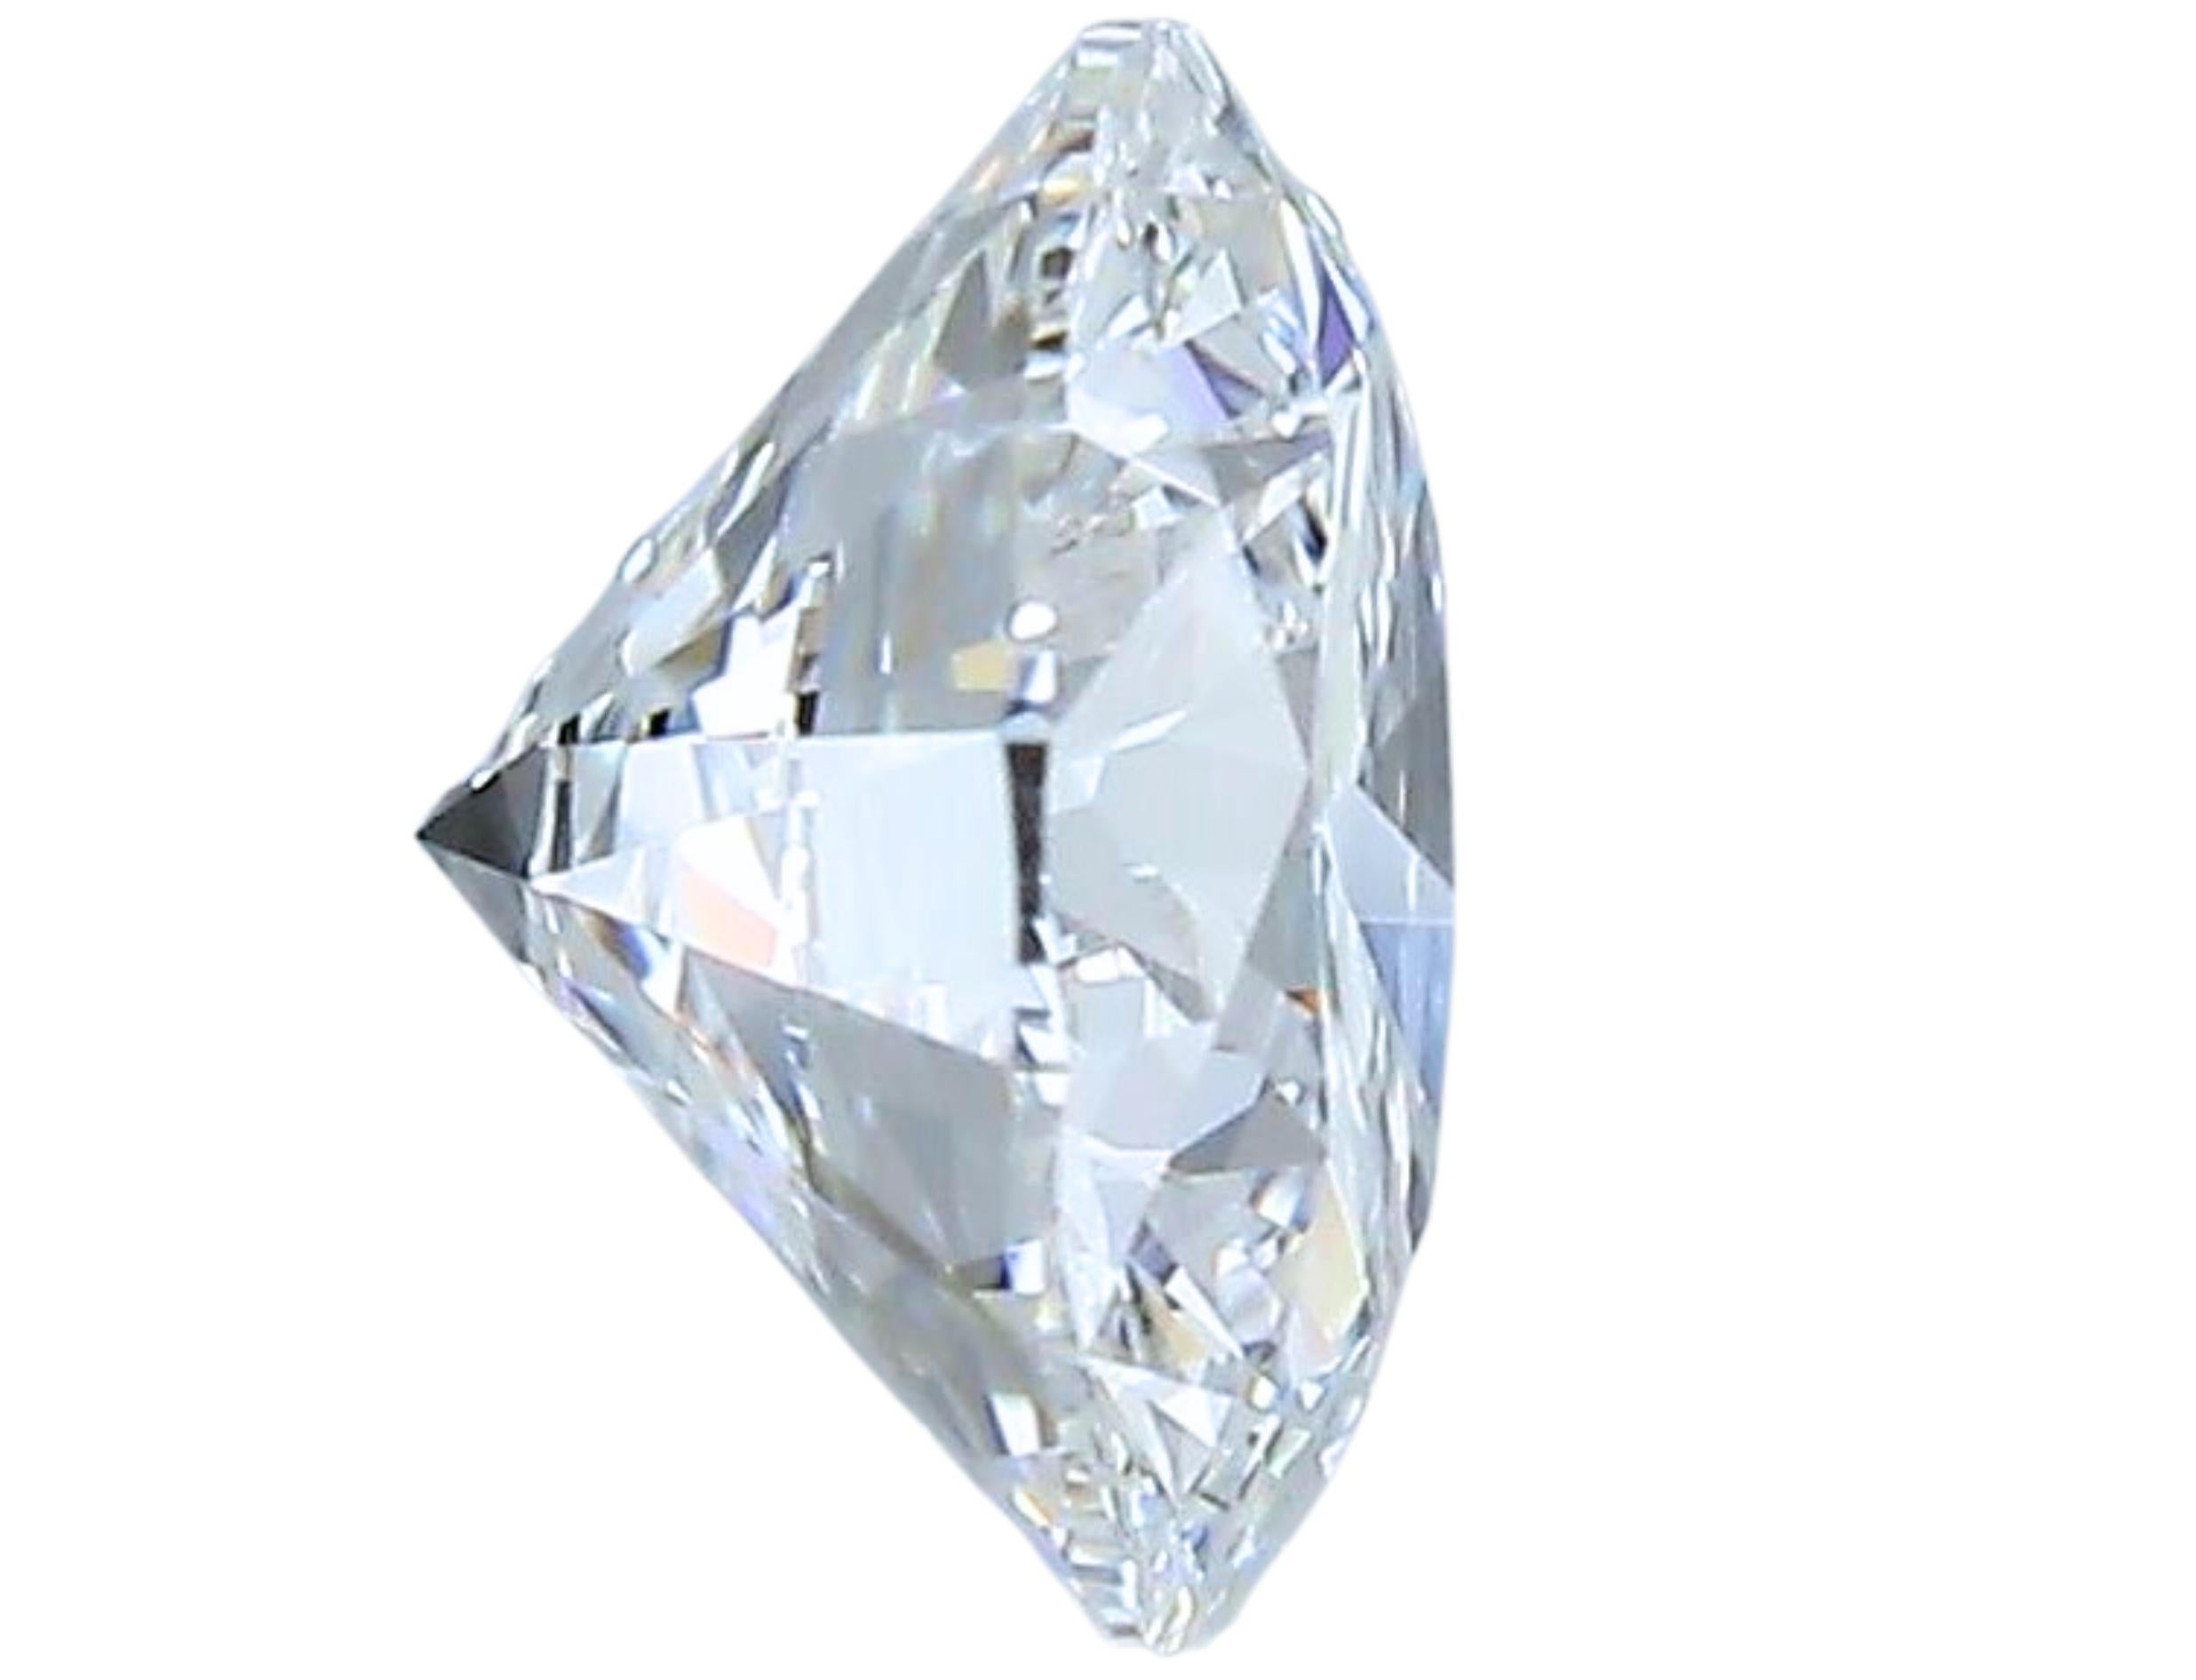 Women's 1pc Sparkling Natural cut Round diamond in a 1.01 carat For Sale